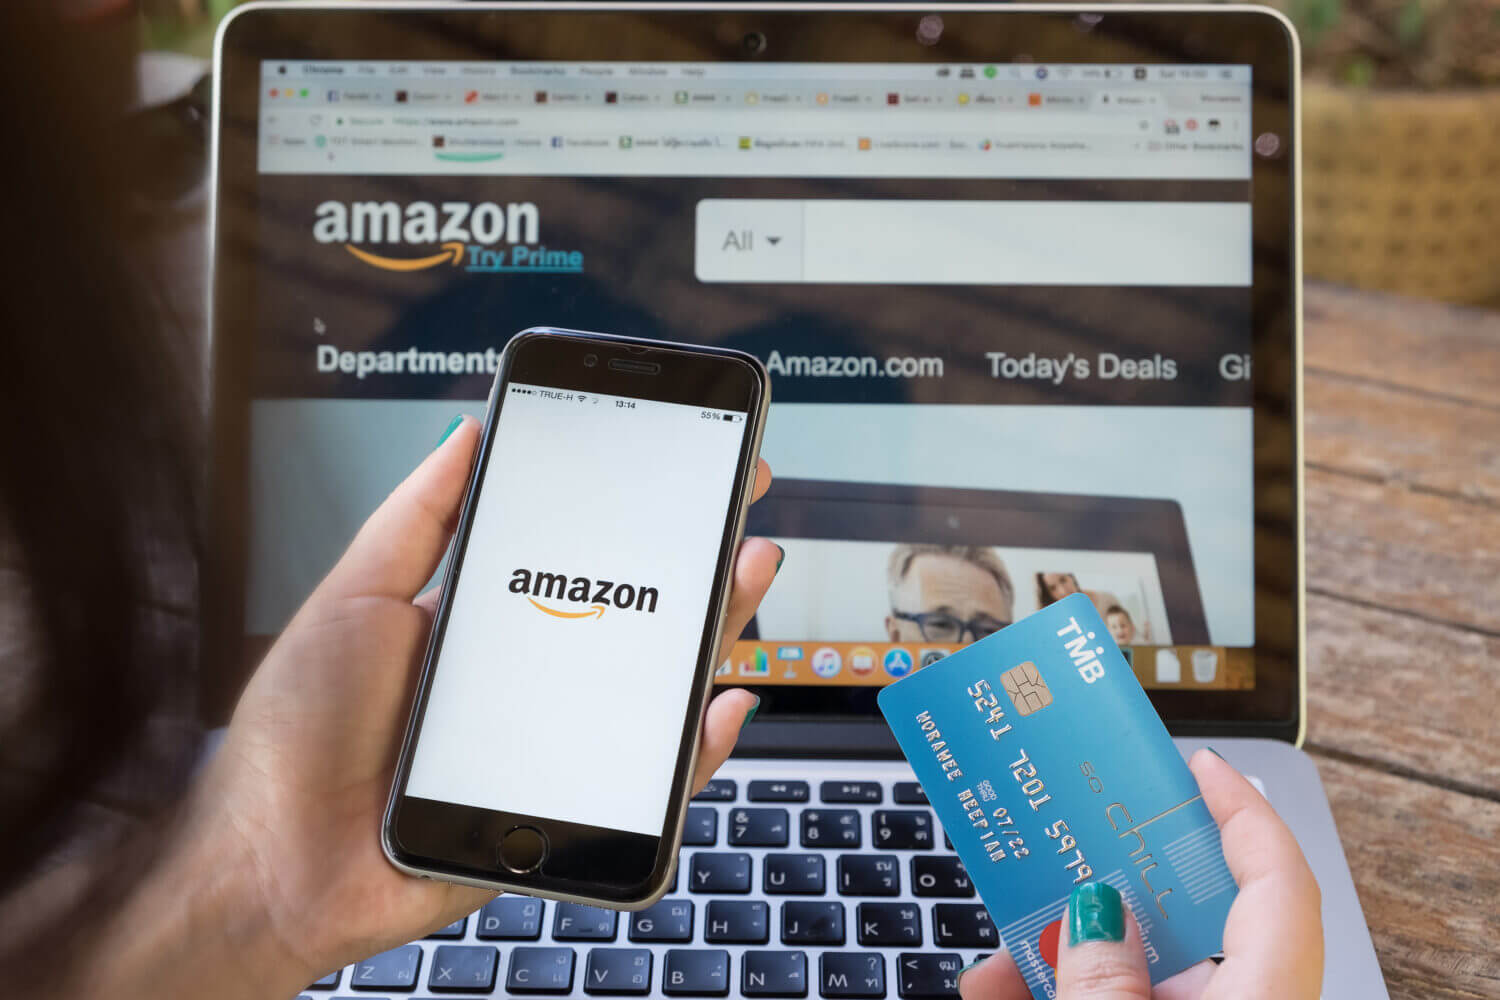 amazon - securing the account, picture of a phone and a visa card